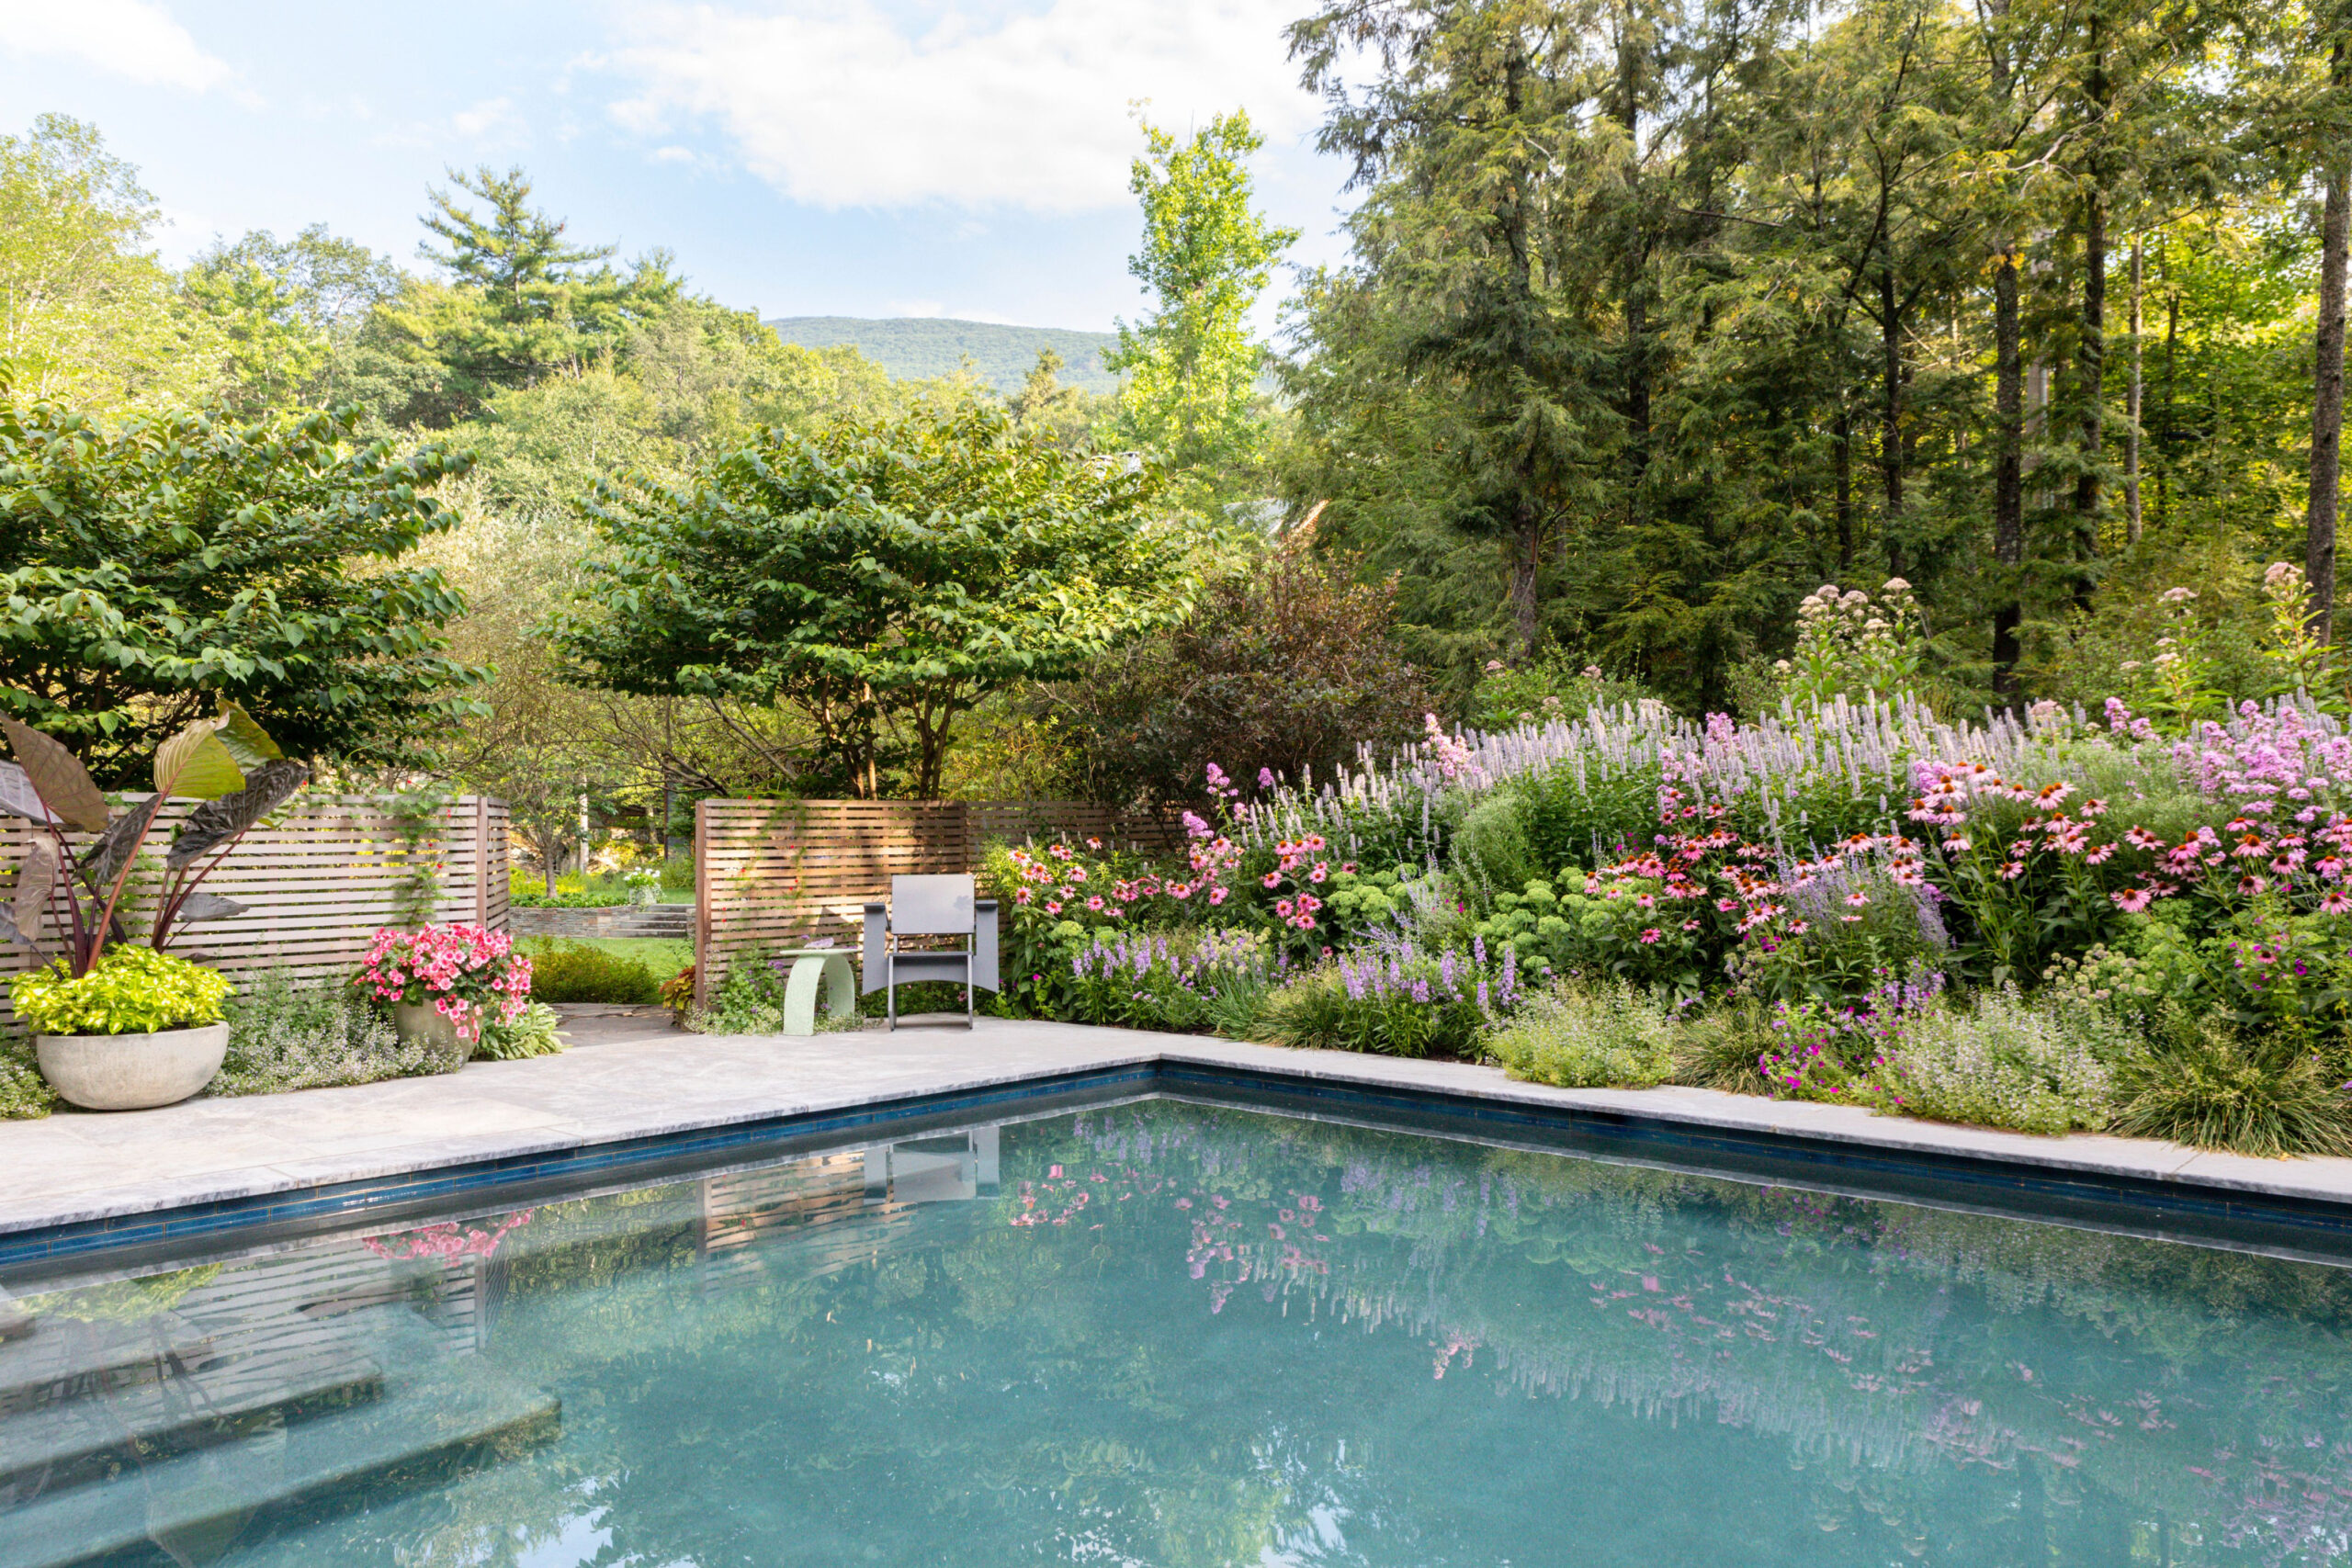 Beautiful Pool Landscaping Ideas for Creating a Relaxing Oasis